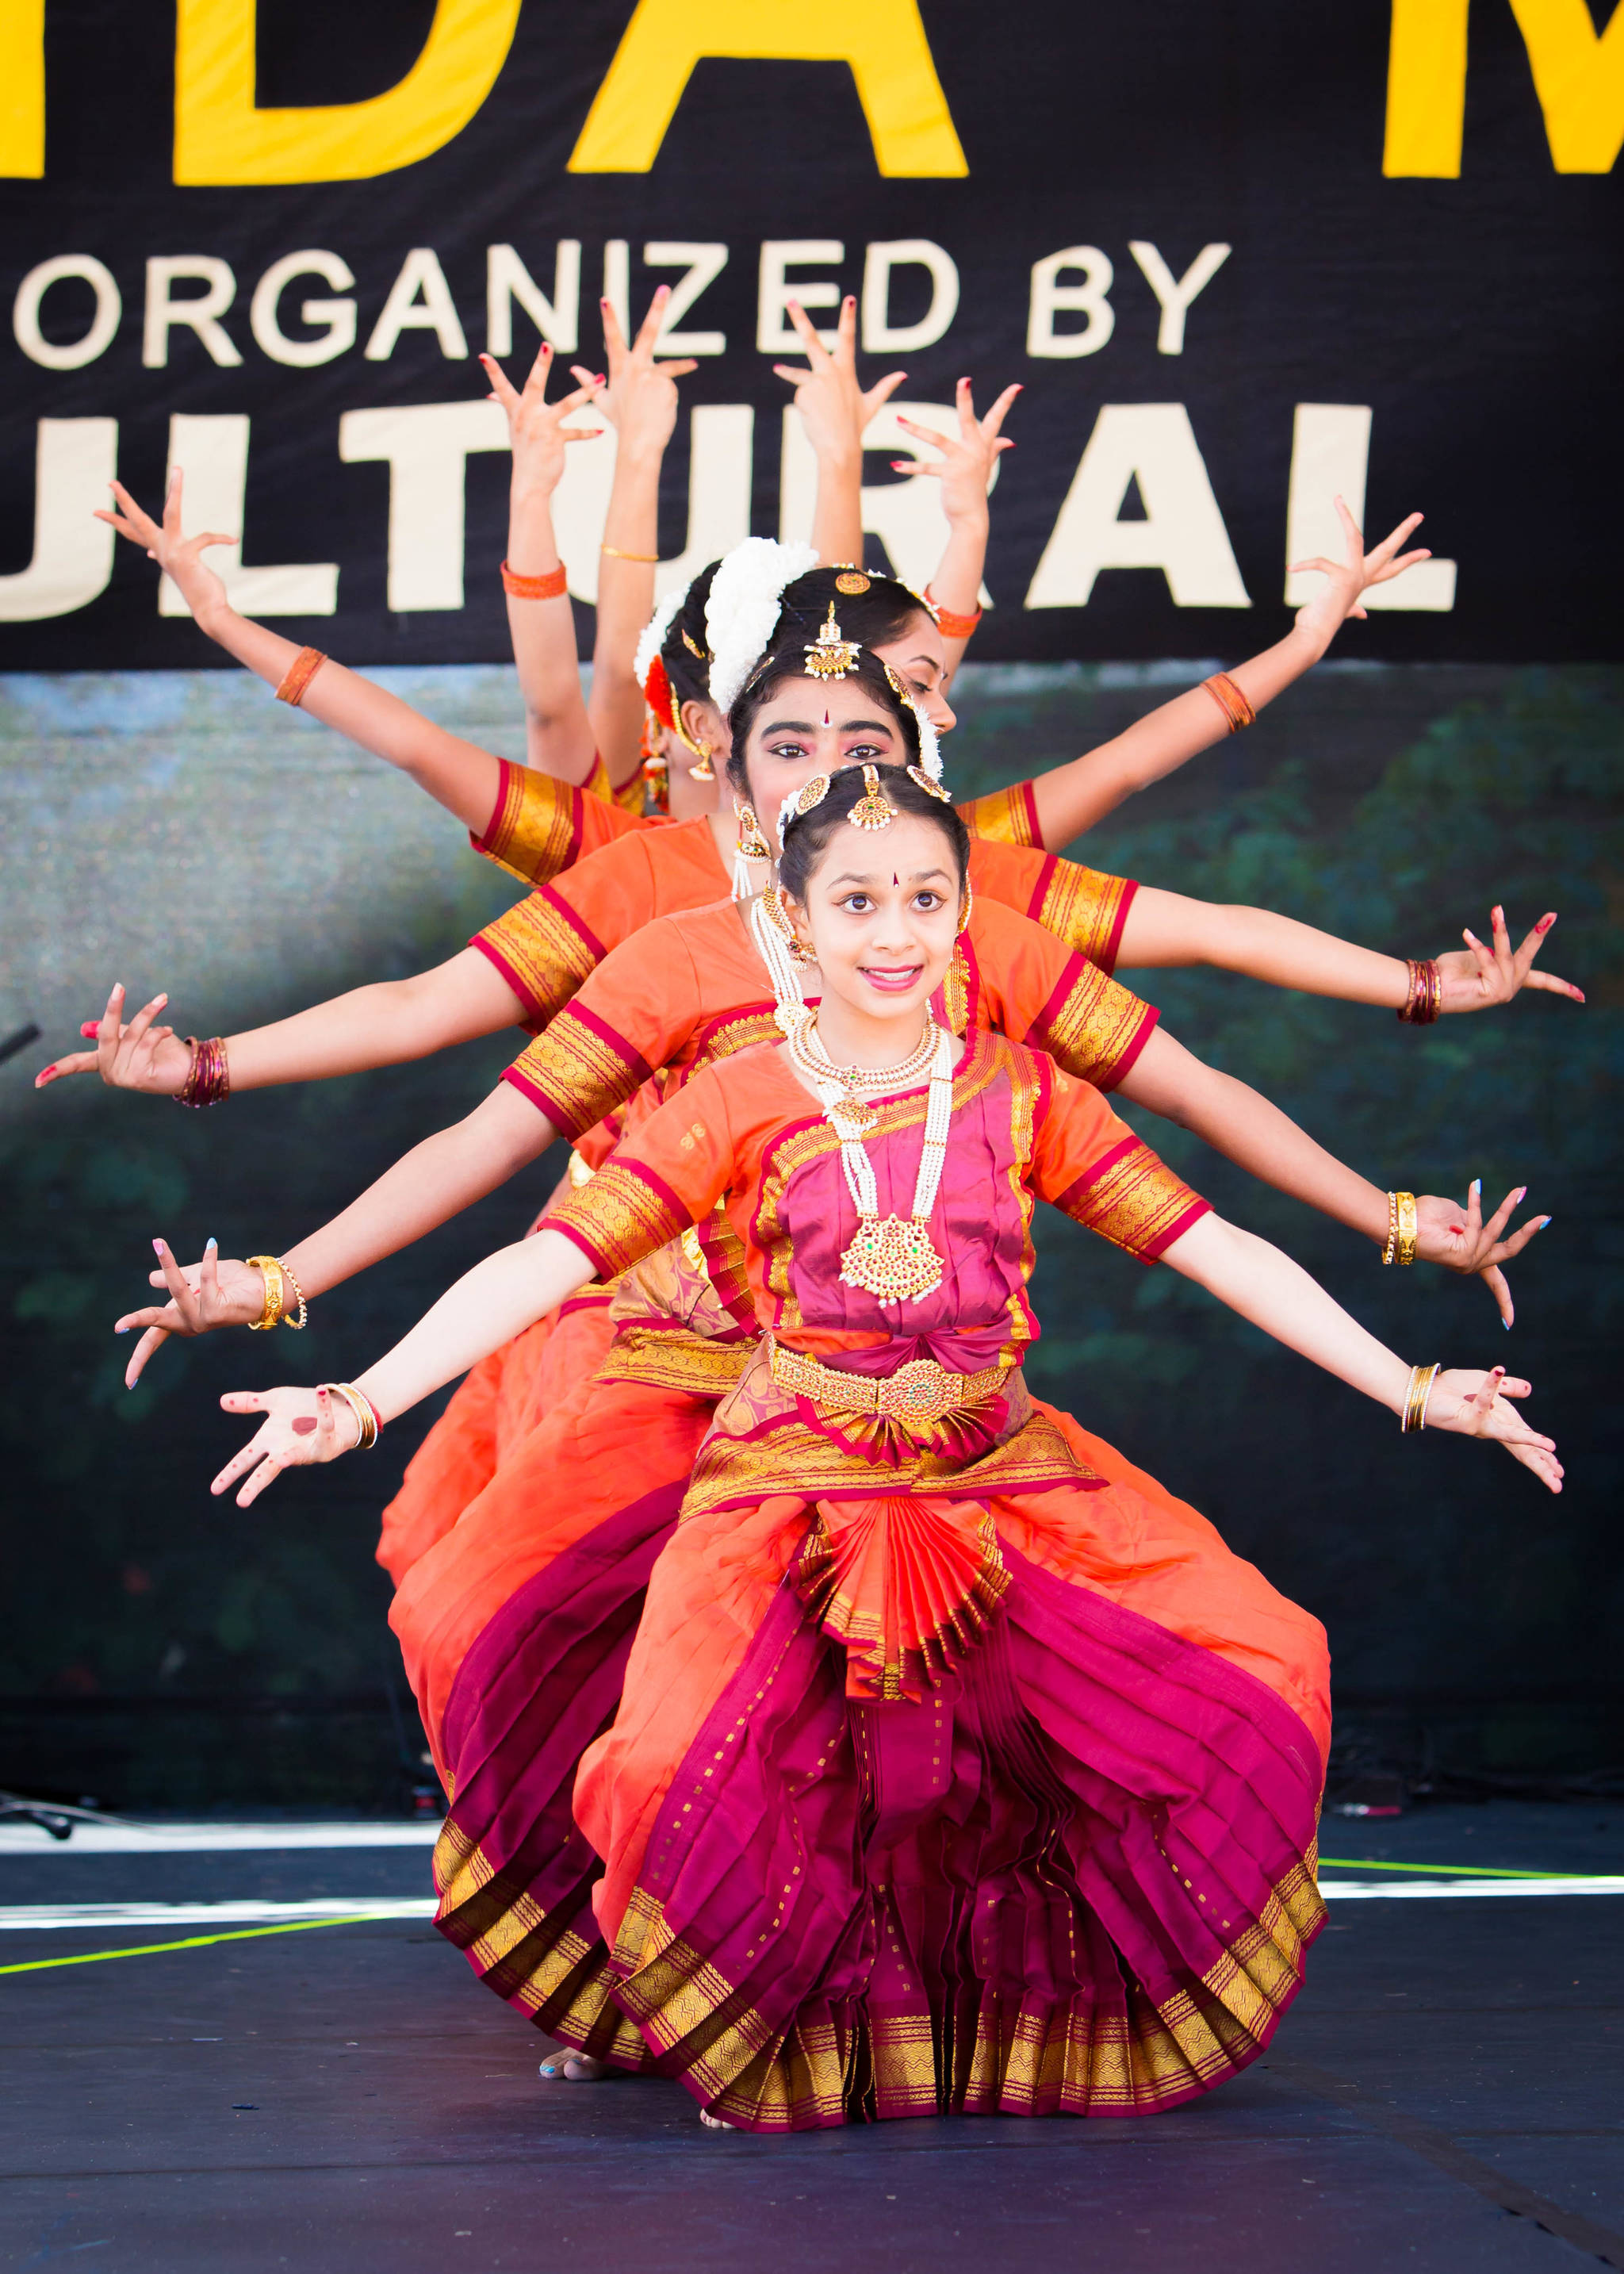 The eighth annual local Ananda Mela (Joyful Festival of India) took place July 29-30 at Redmond City Hall. The massive festival of Indian art and culture featured traditional Indian arts, culture, cuisine, languages and literature. Courtesy photo